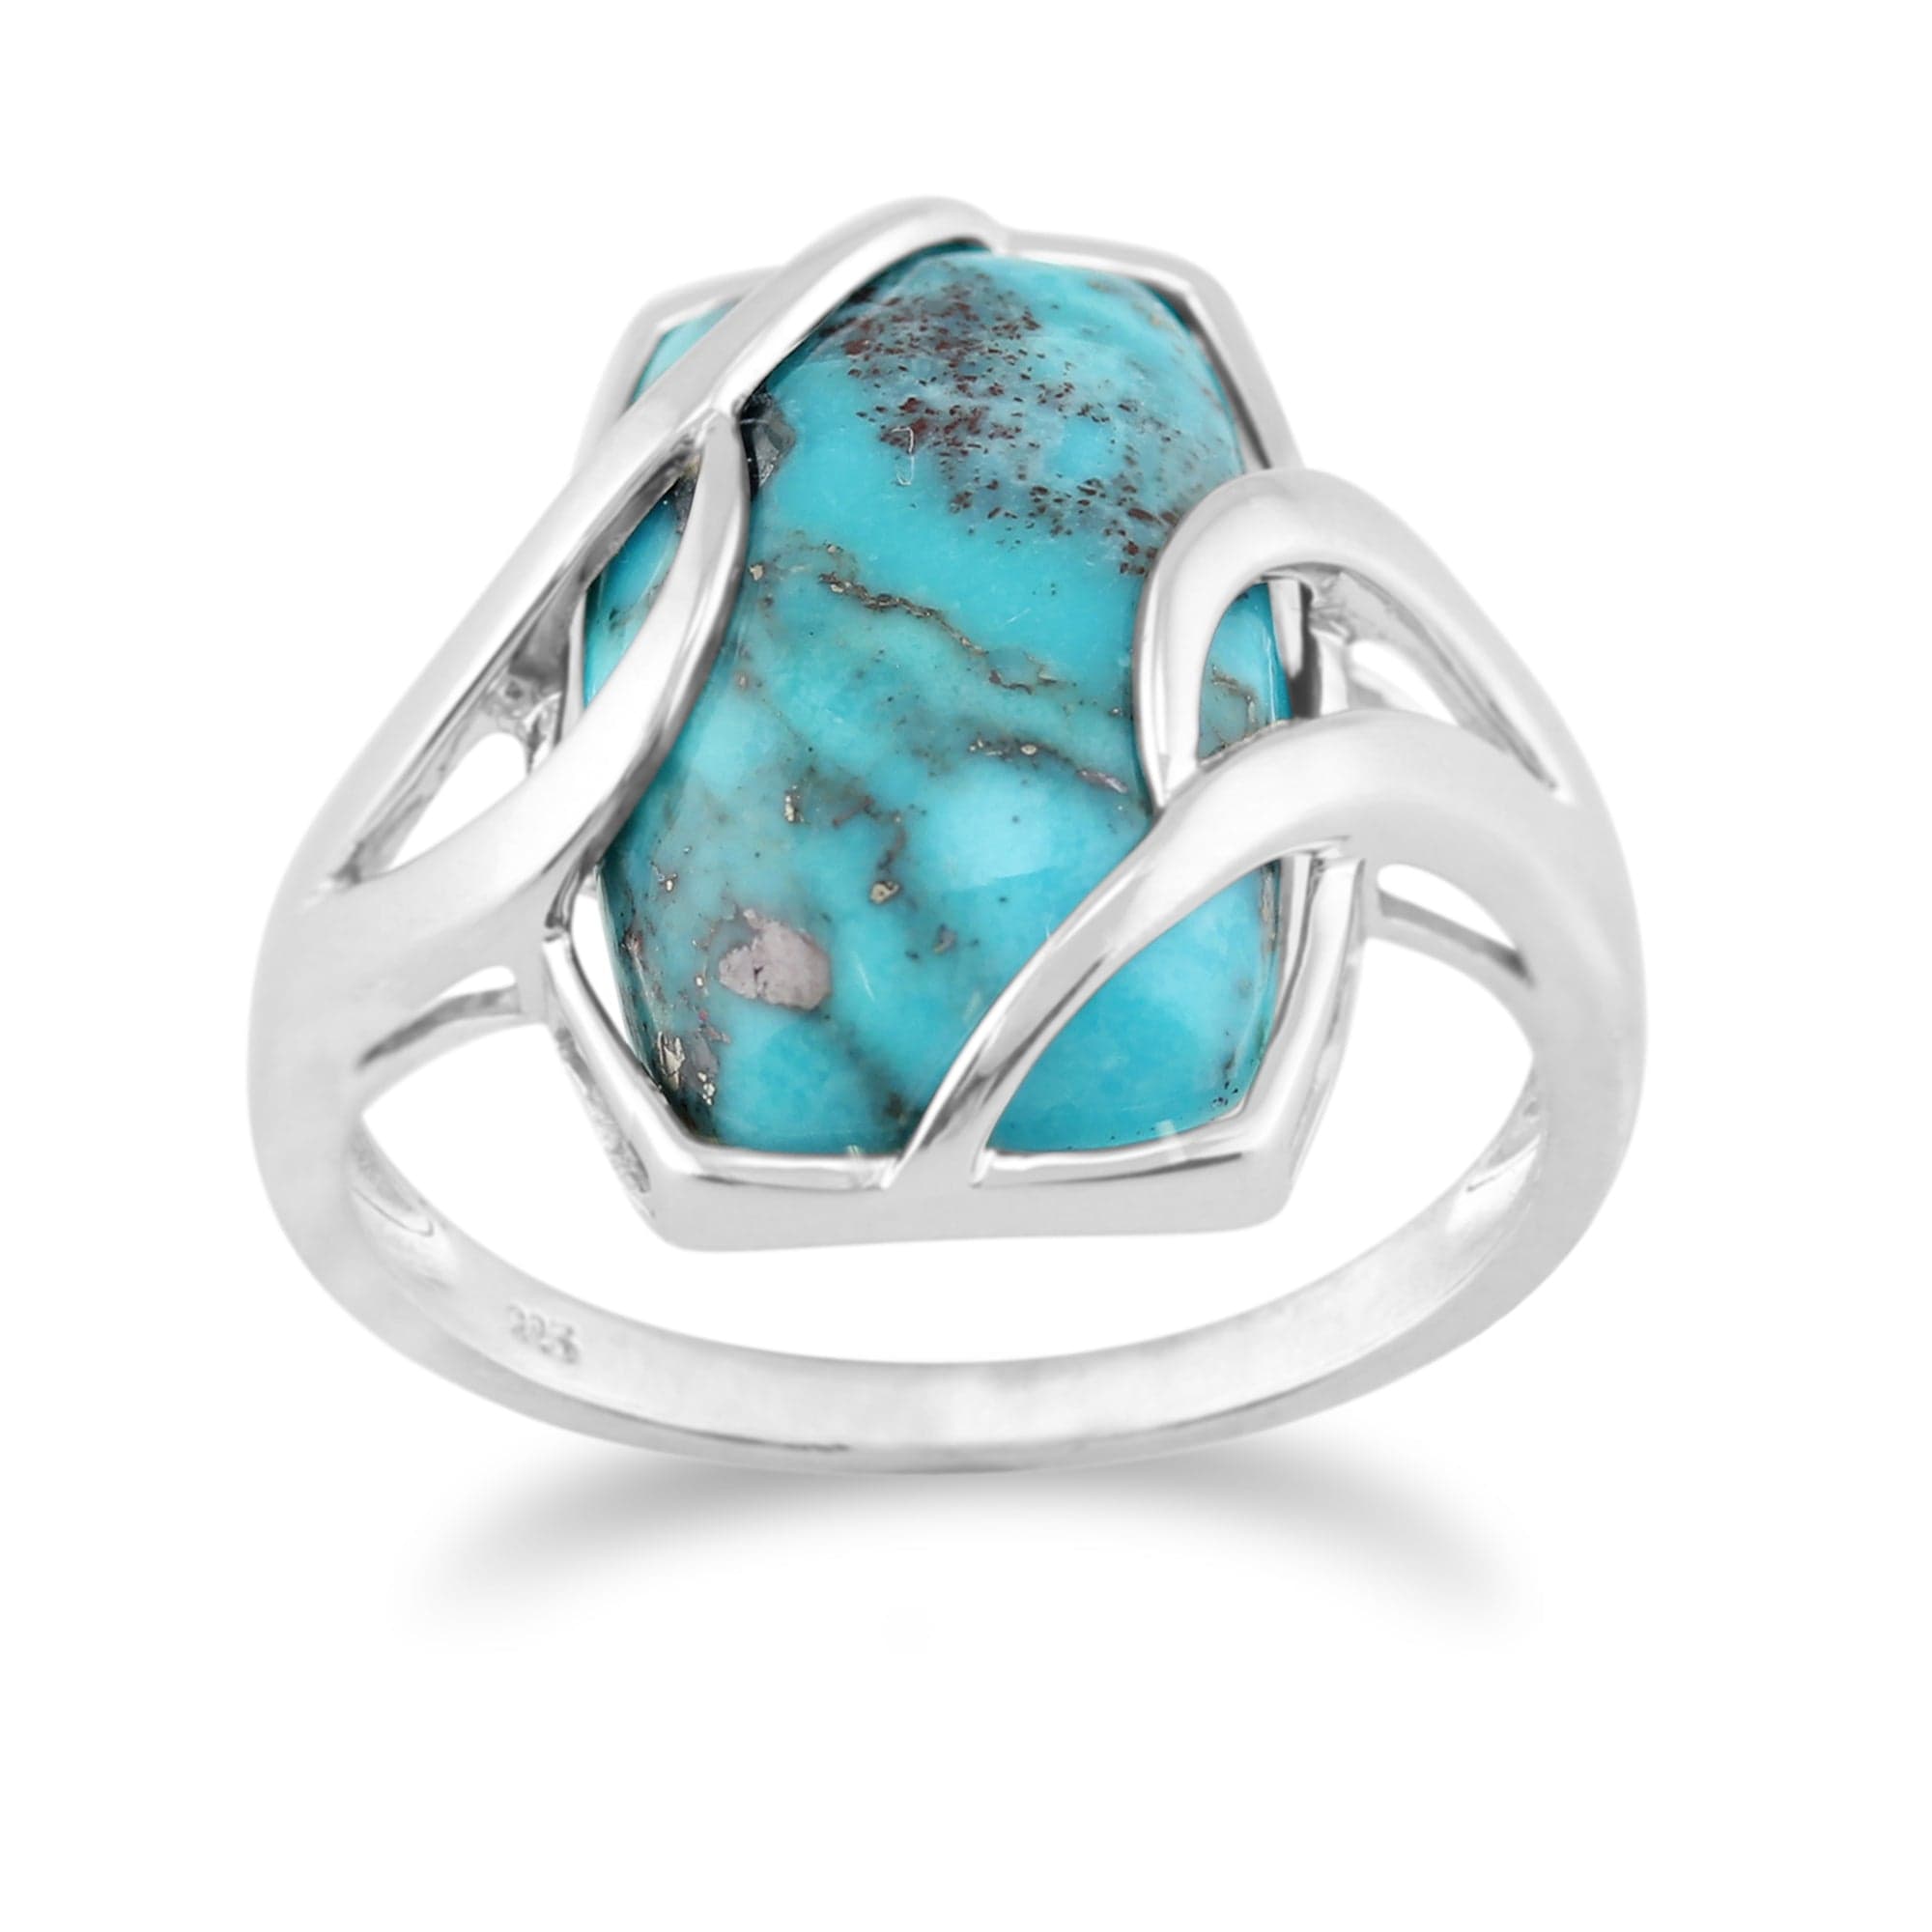 Gemondo Sterling Silver 6.50ct Turquoise Cabochon Contemporary Baguette Ring Image 1